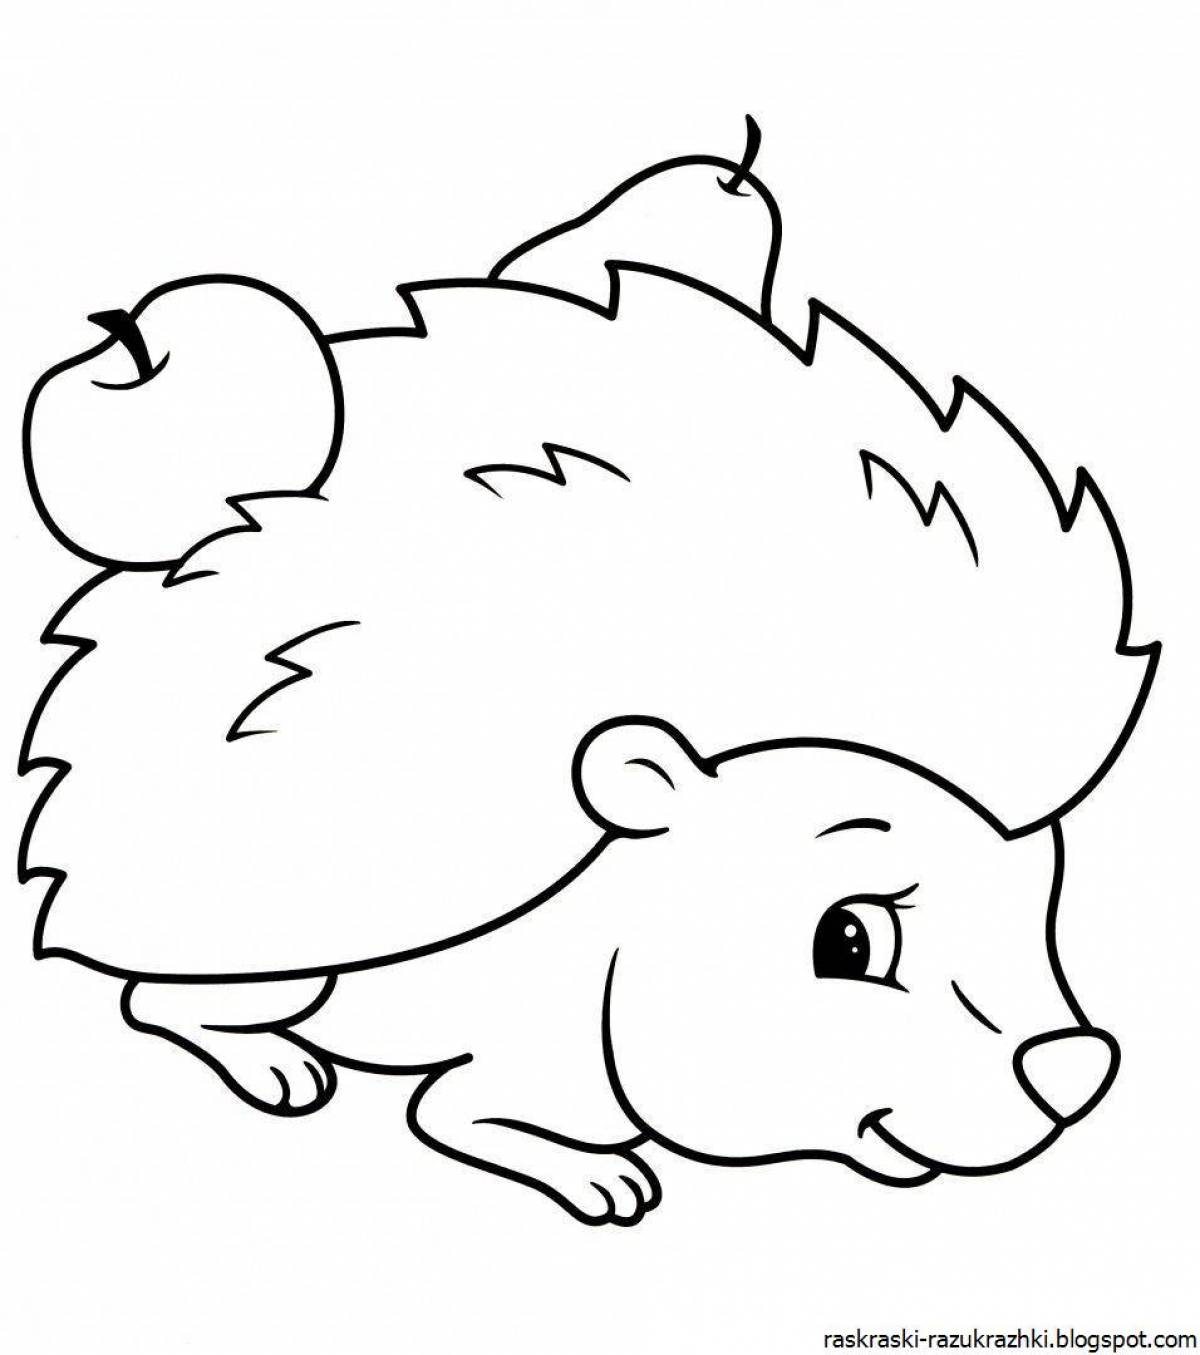 Glowing hedgehog coloring page for kids